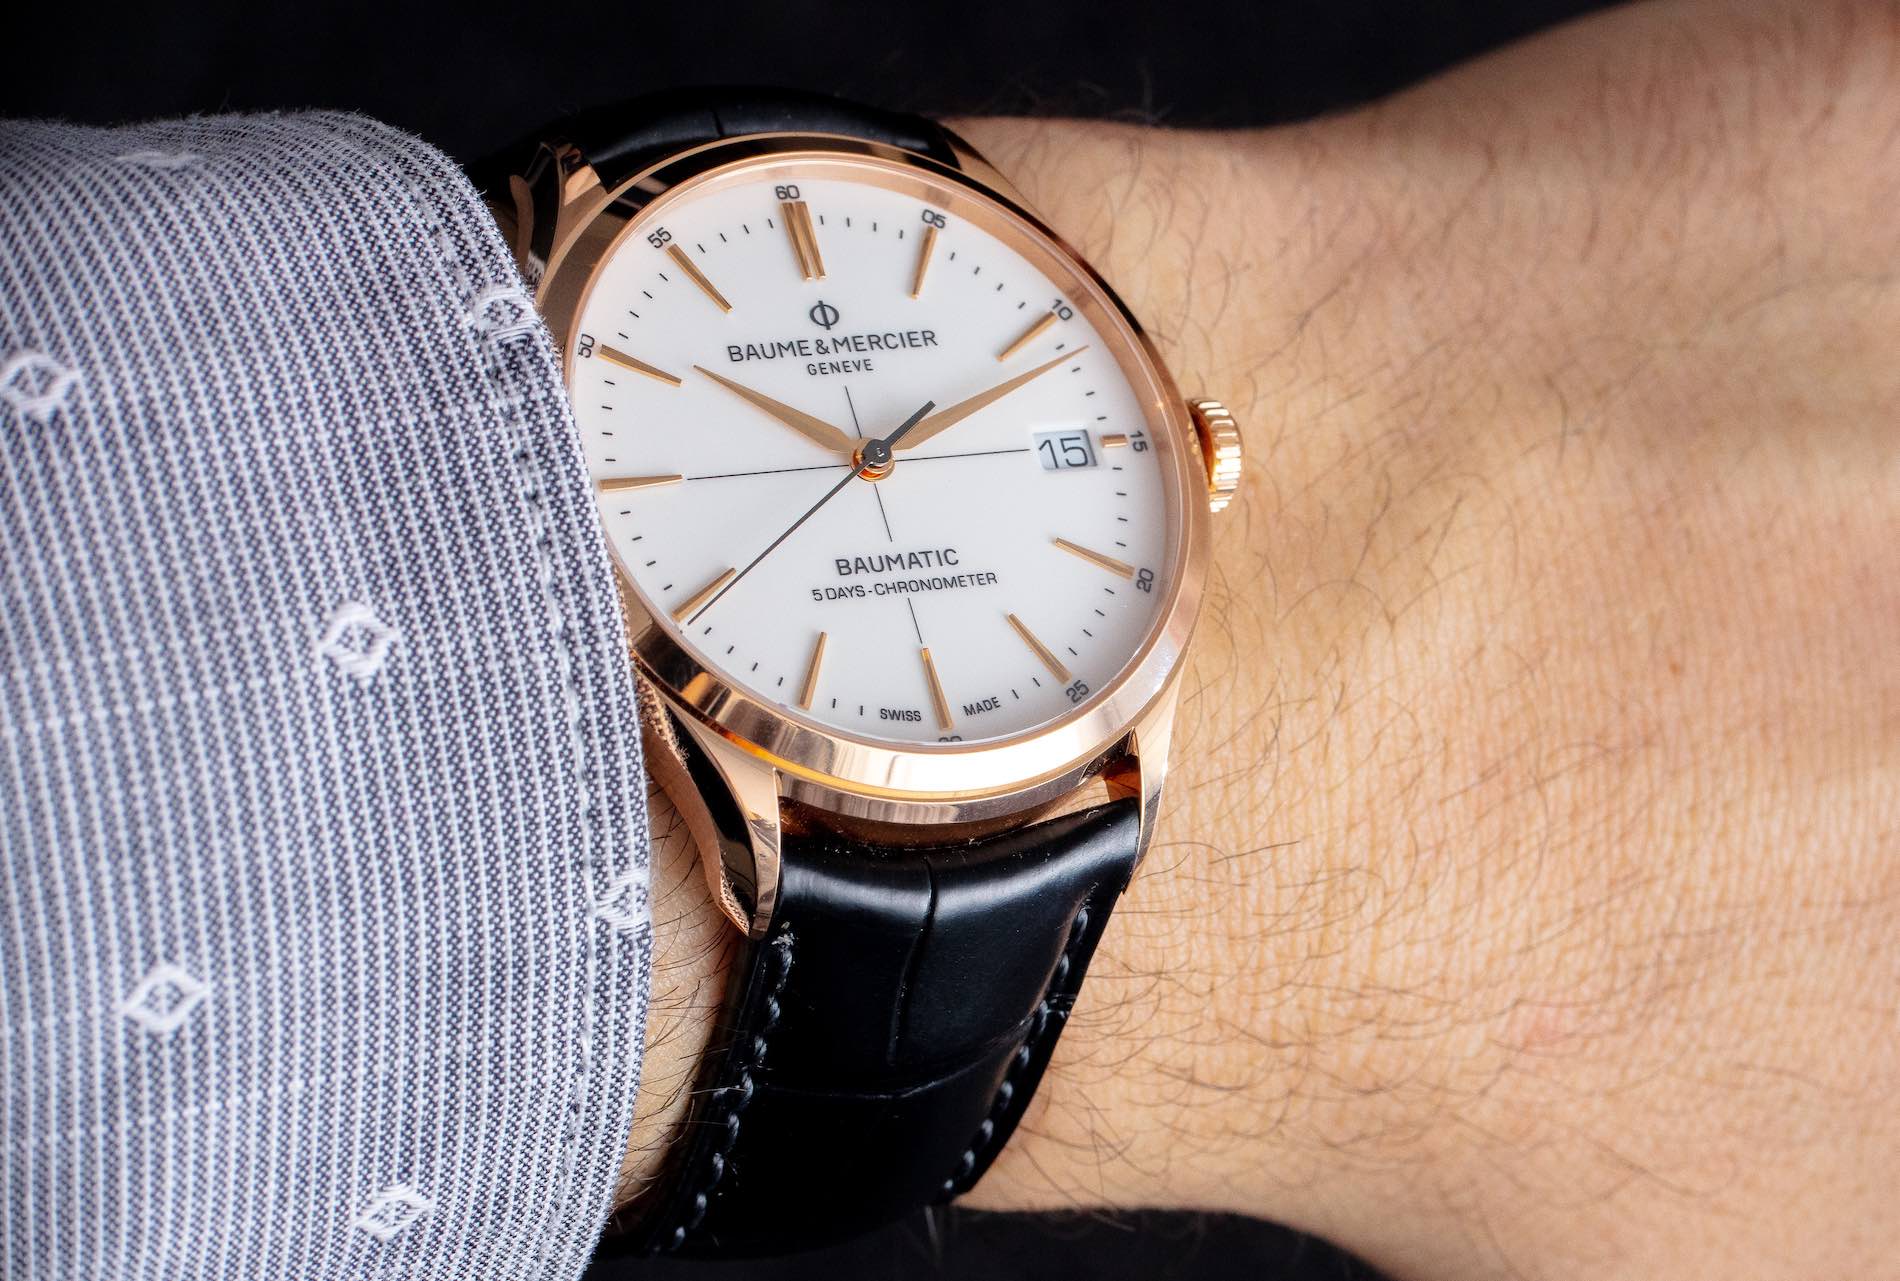 Baume & Mercier Clifton Baumatic Red Gold Watch For 2019 Hands-On